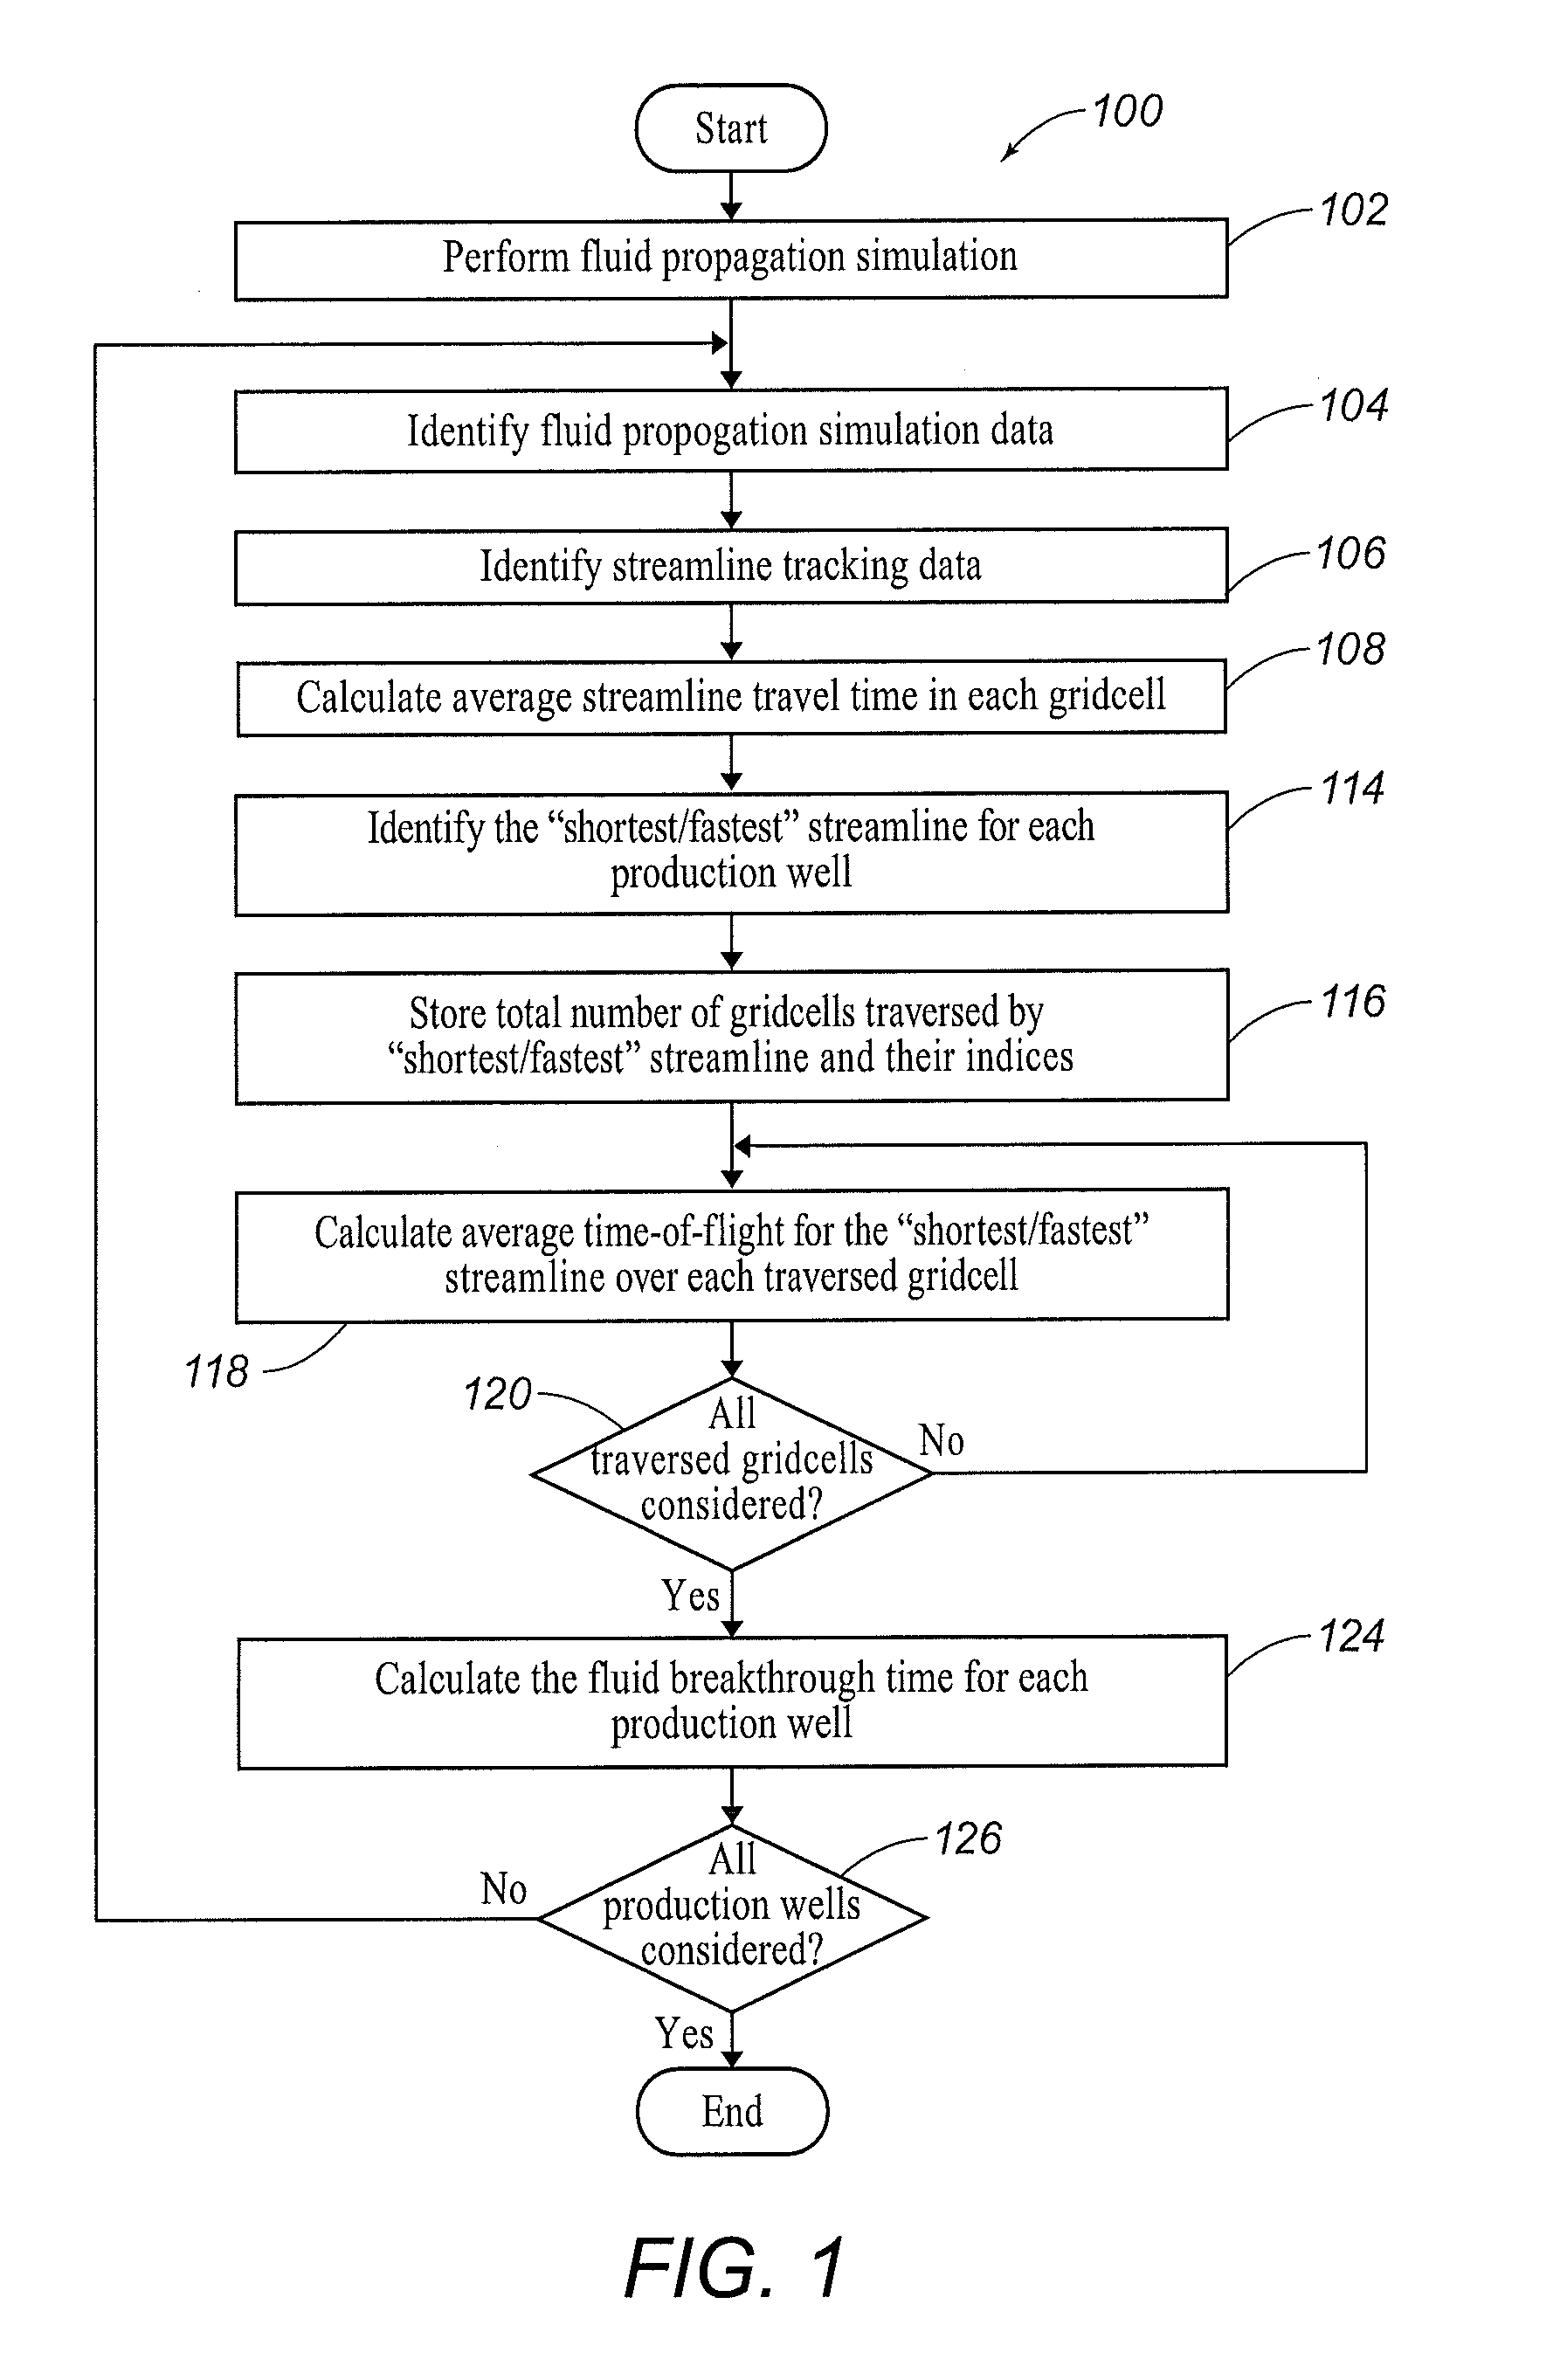 Systems and Methods for Estimating Fluid Breakthrough Times at Producing Well Locations